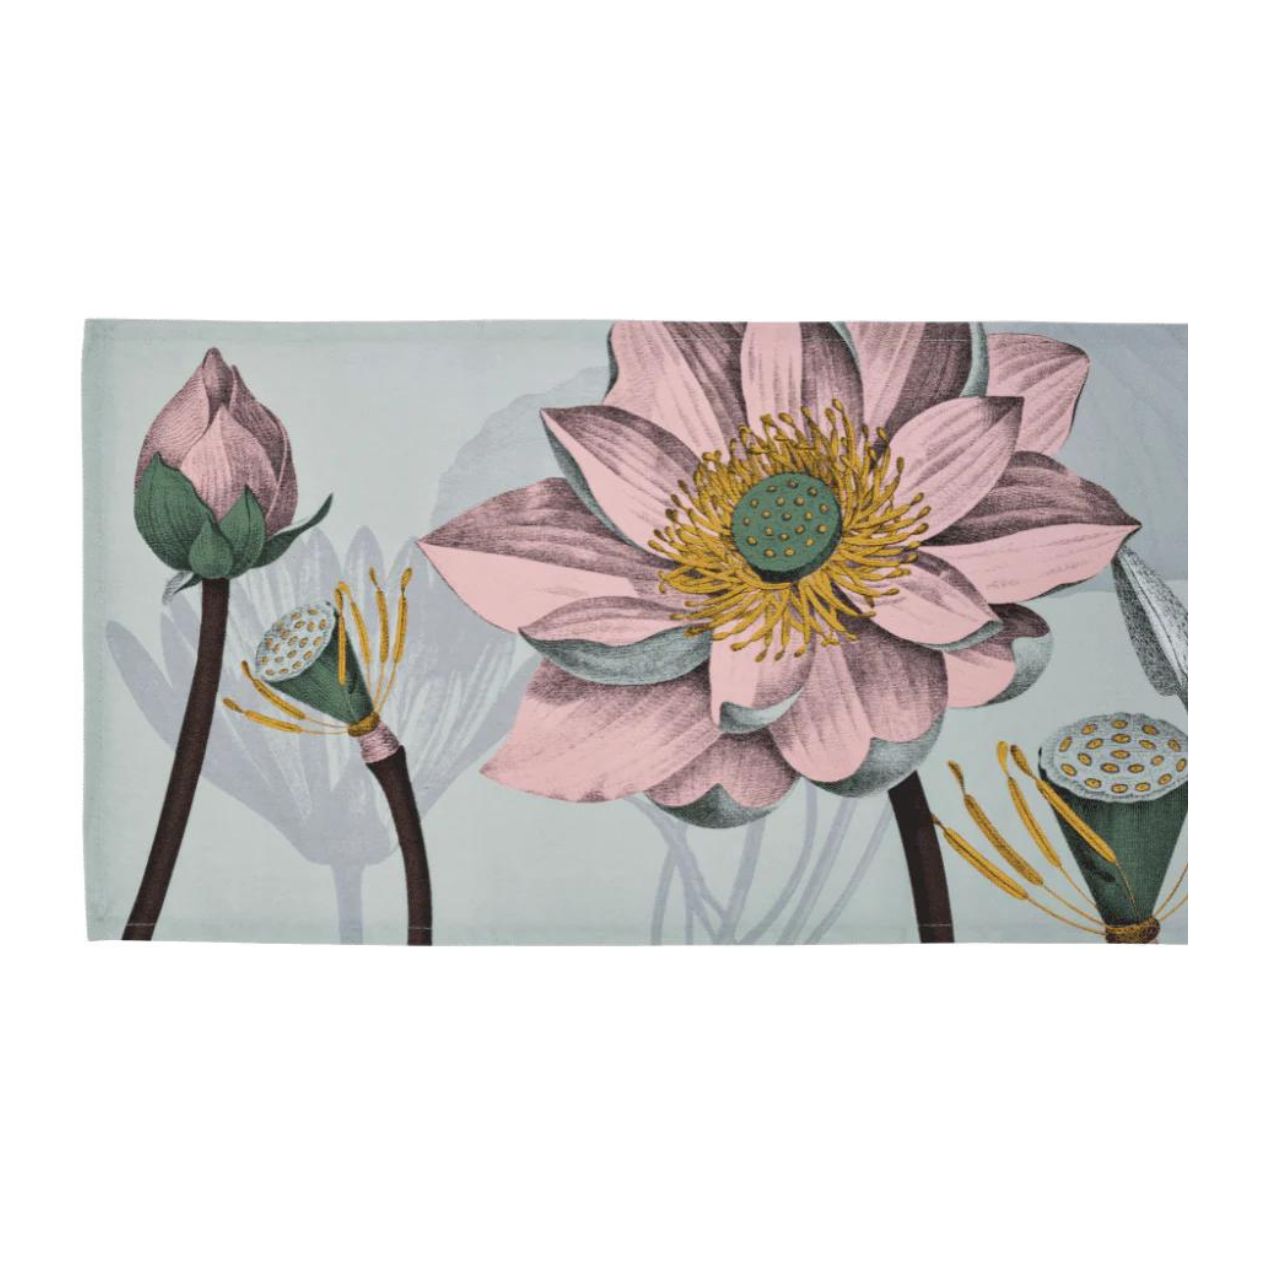 Nature Bloom Table Runner by Mindy Brownes Interiors  A beautiful table runner featuring a floral designs with pops of pink, blue and green.  - Ideal house warming gift, new home, birthday or general occasion. - Part Of Our Nature Bloom Collection